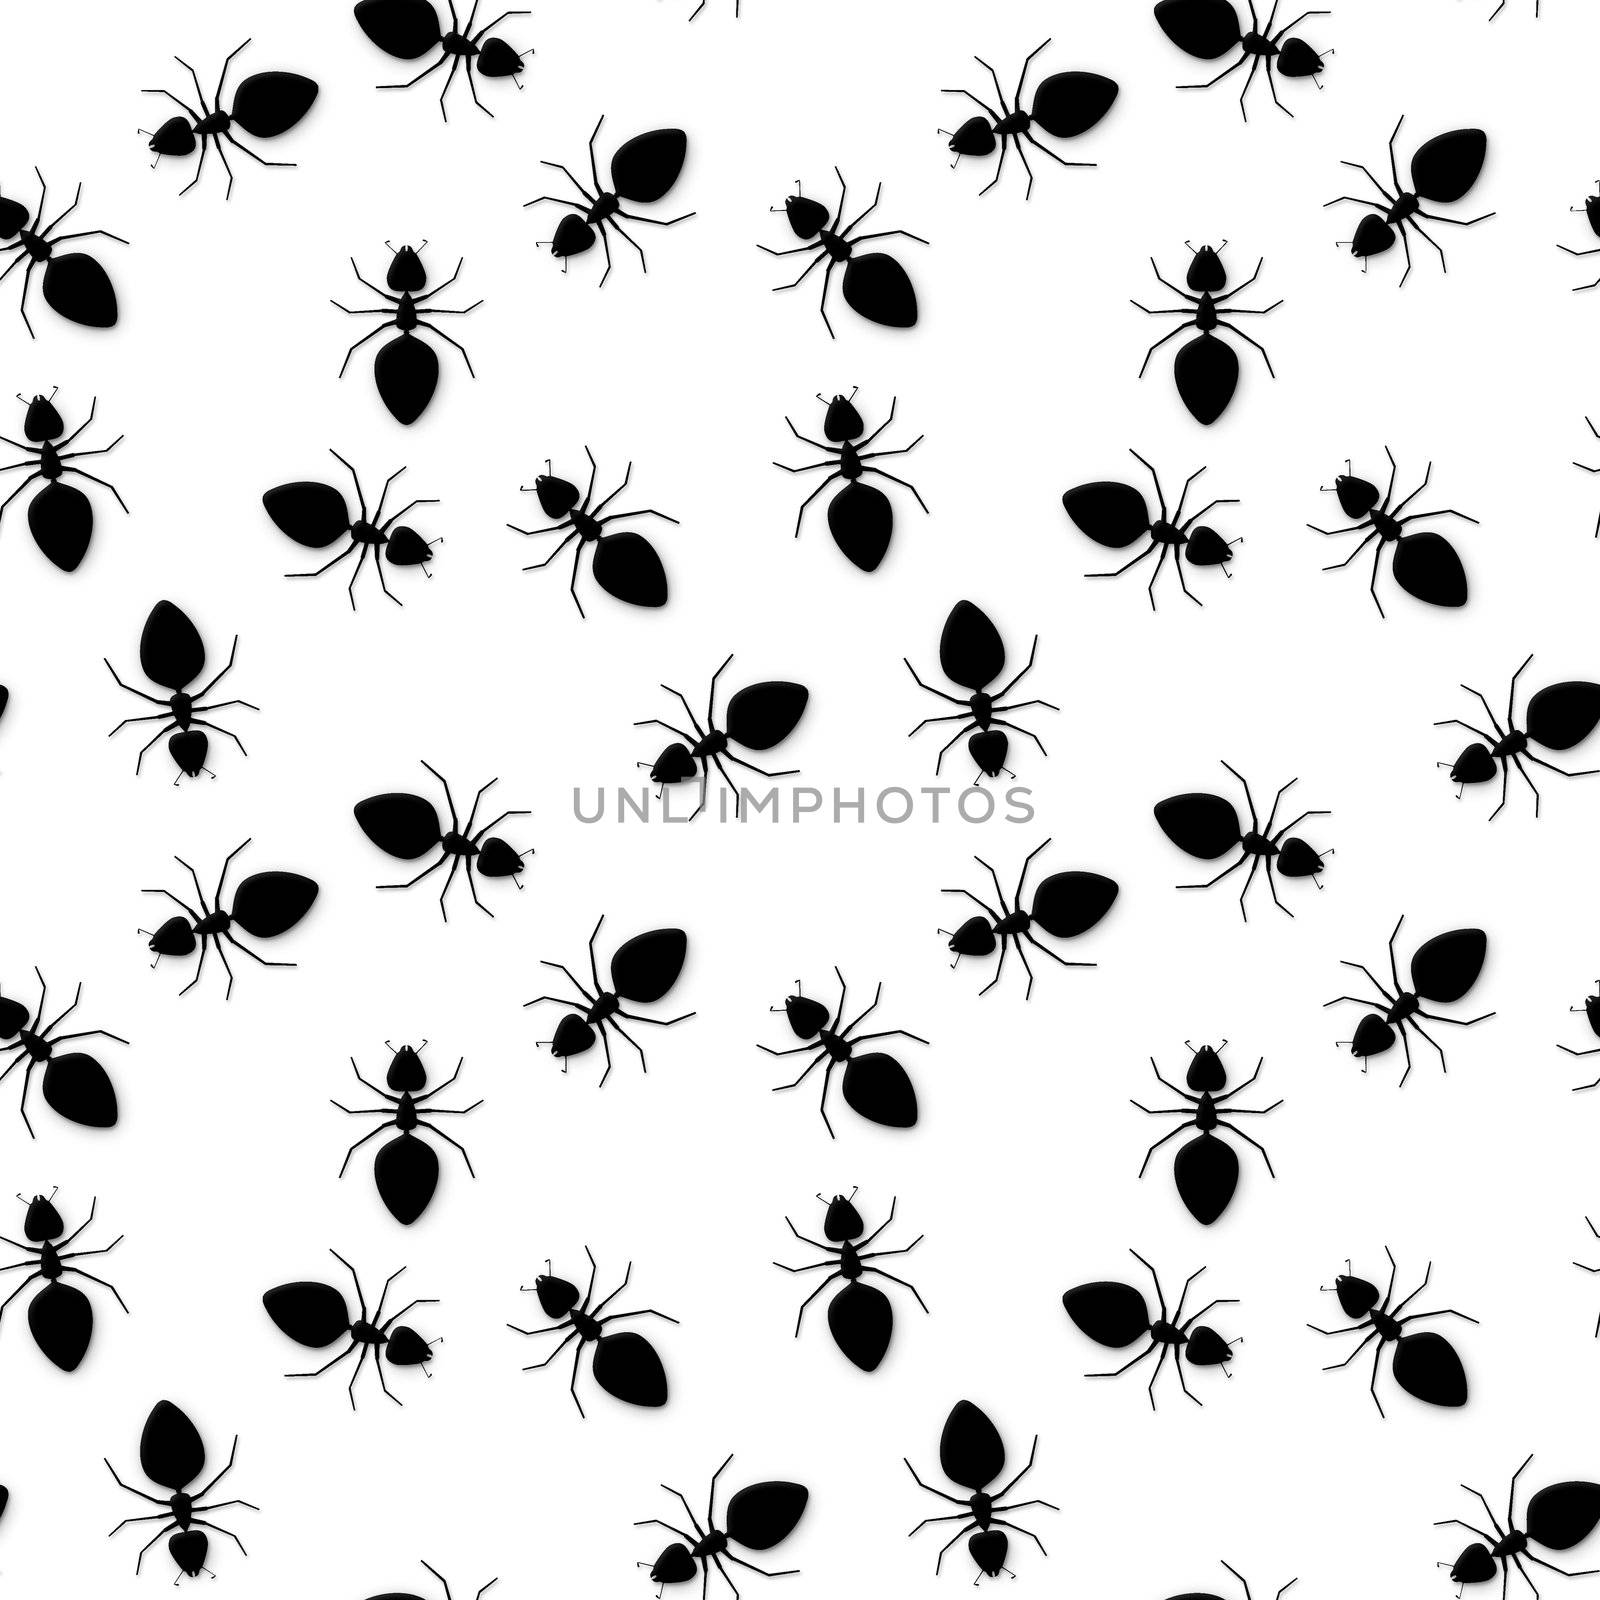 Seamless texture - silhouettes of ants by pzaxe